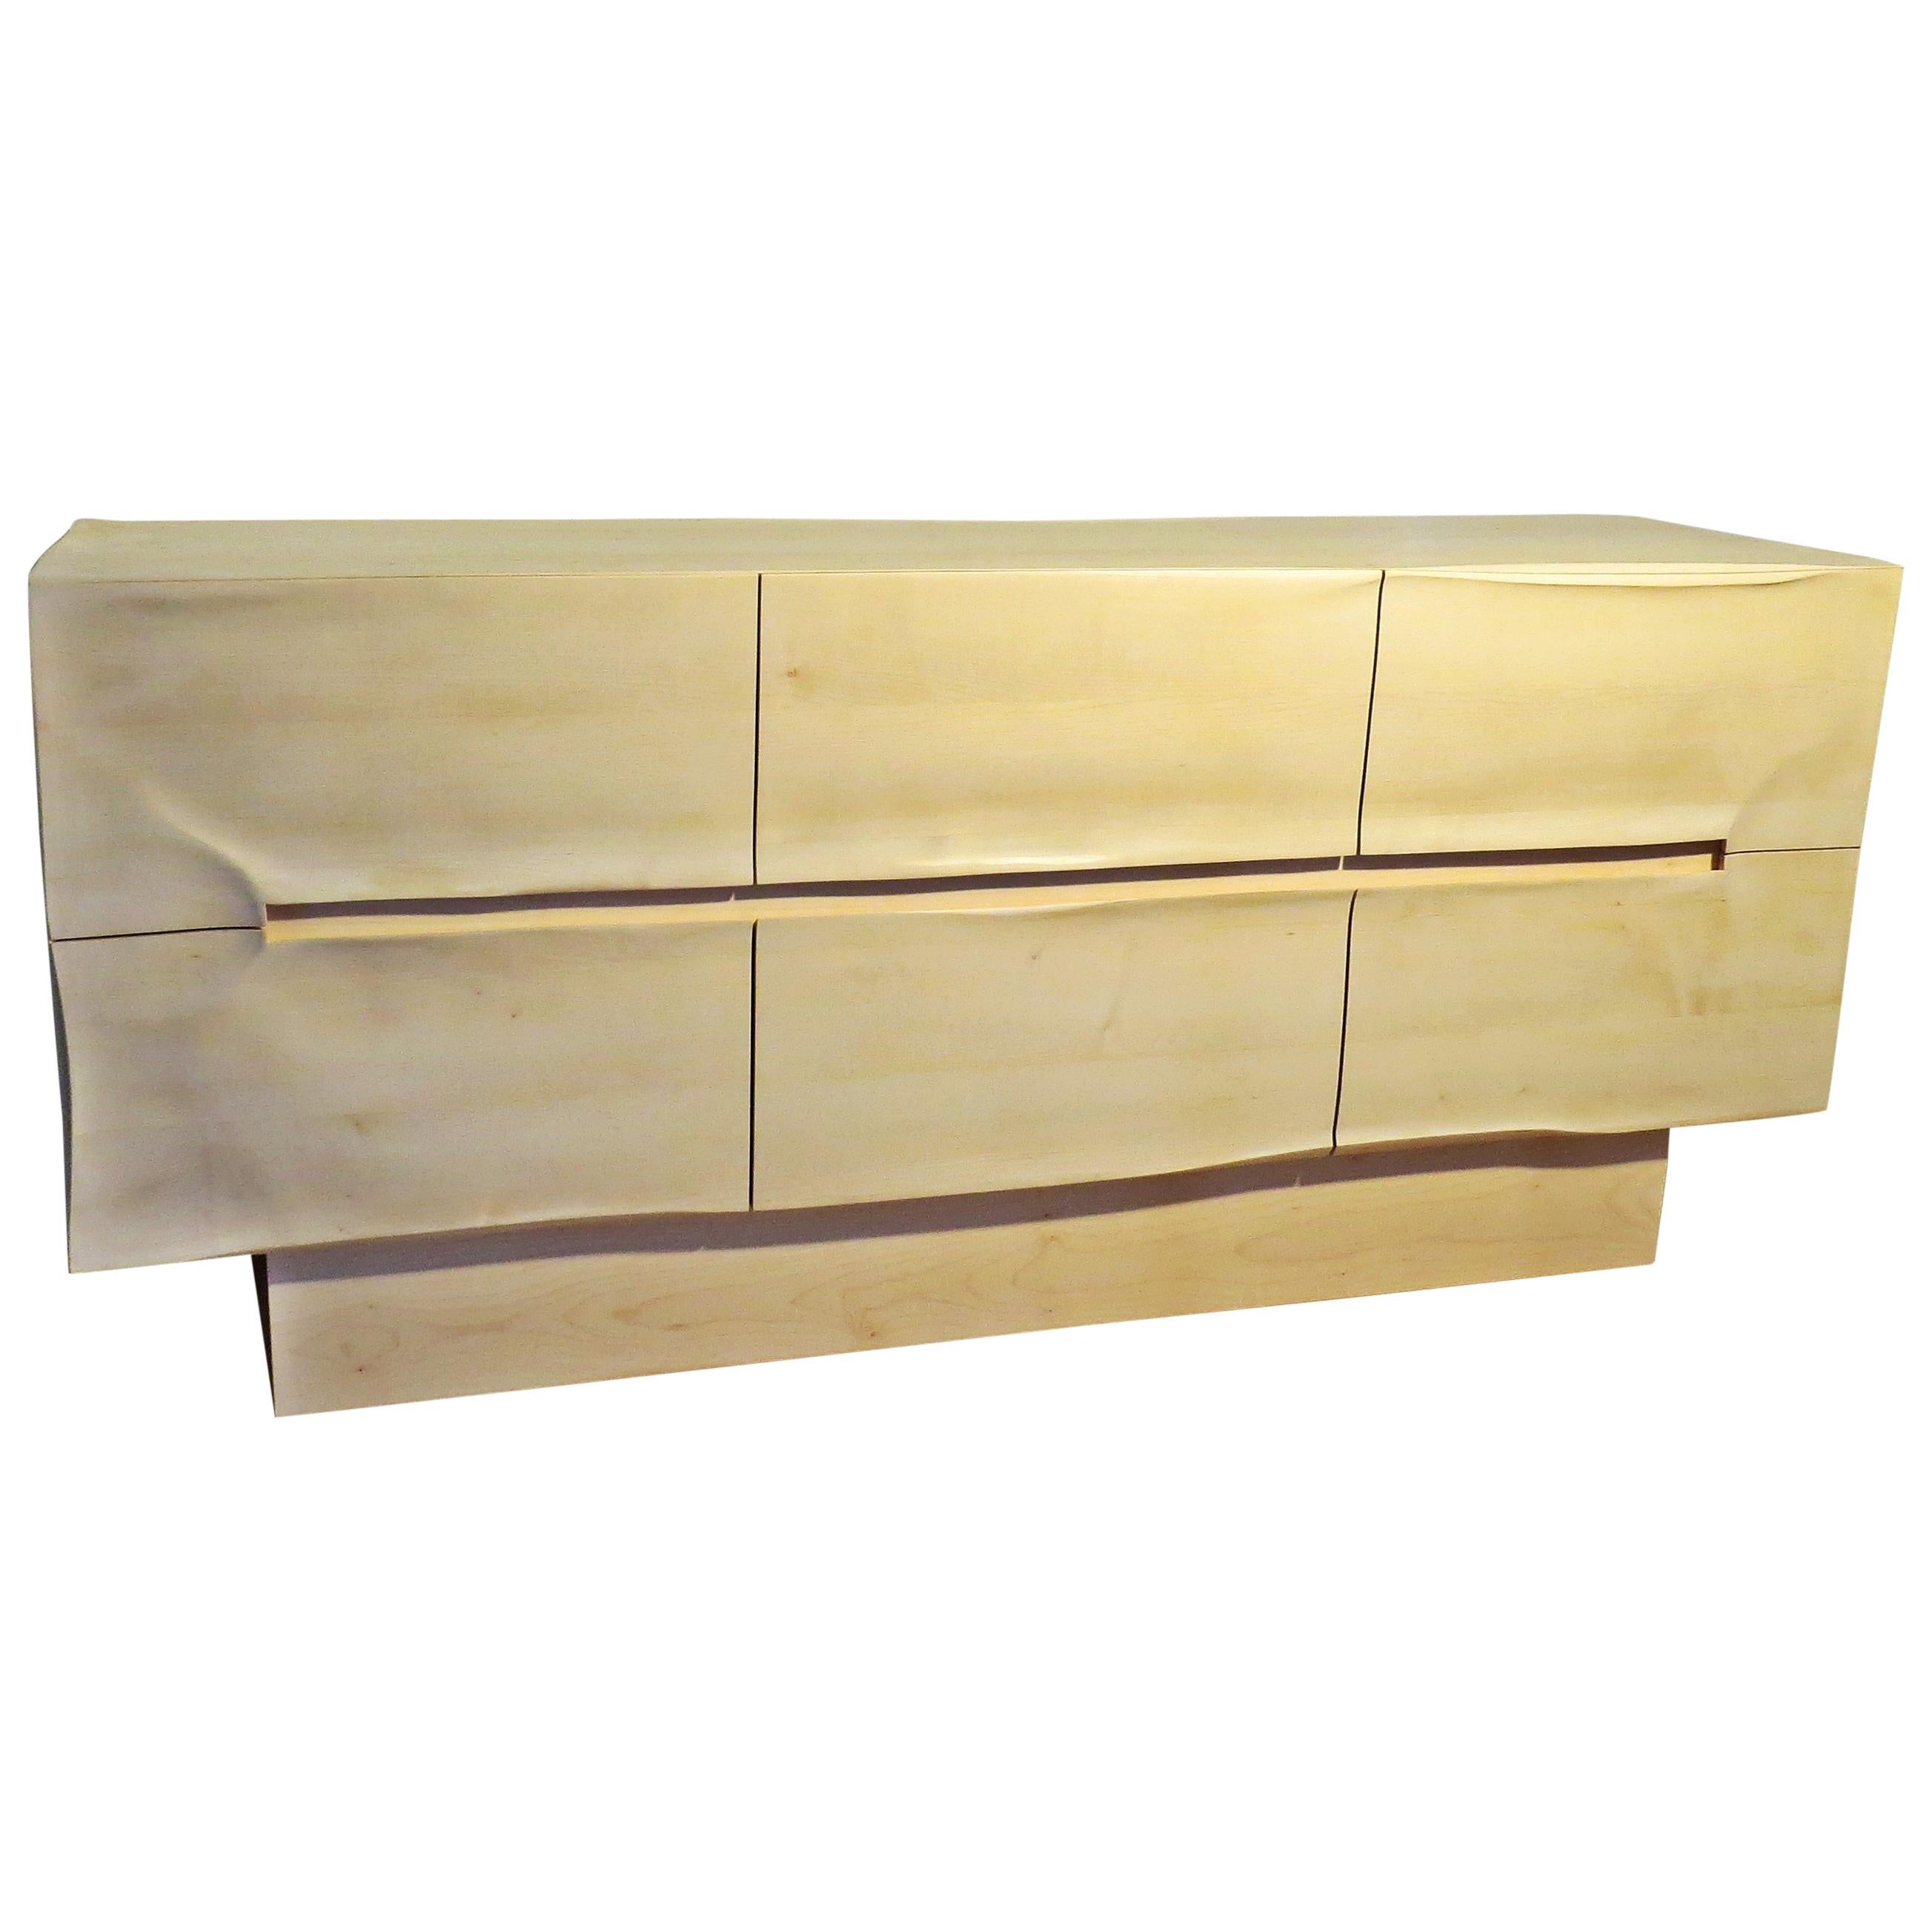 These sideboards are made by hand in organic design.
The furniture is very sculptural but modern, through the surfaces with wrinkles and bumps creates a play with light and shadow.
The grip section is integrated and incorporated into the